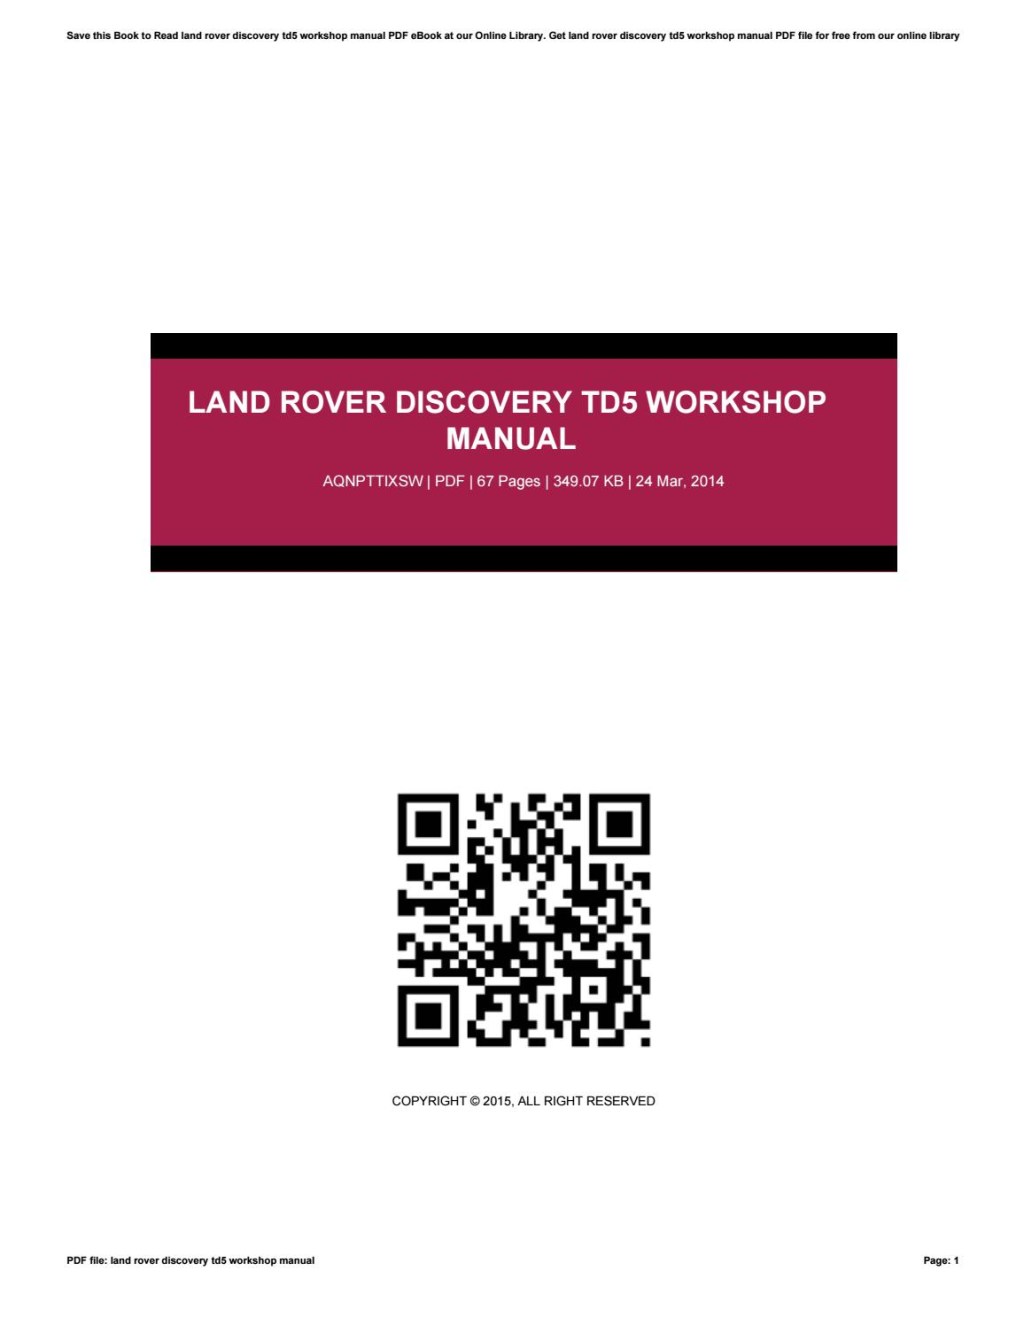 Picture of: Land rover discovery td workshop manual by reddit – Issuu